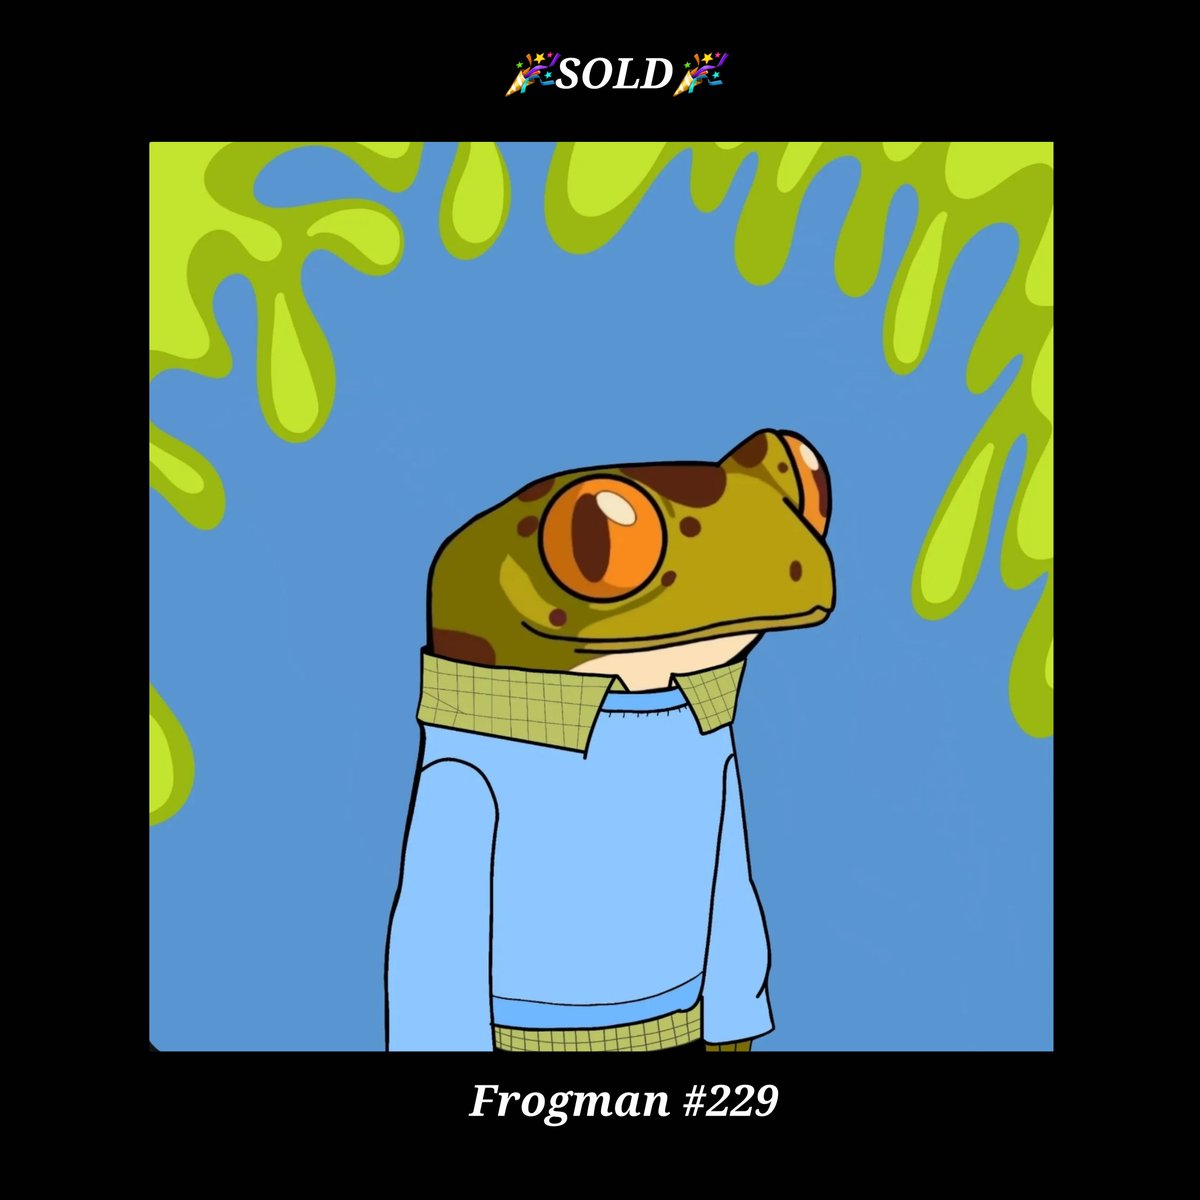 🎉SOLD🎉

Frogman #229
Owned by: ___FrogMan___
Thanks,congratulations 🎊
opensea.io/assets/matic/0…

#Frogman
#NFTs #PolygonNFTs #NFTArts #OpenSeaCollection